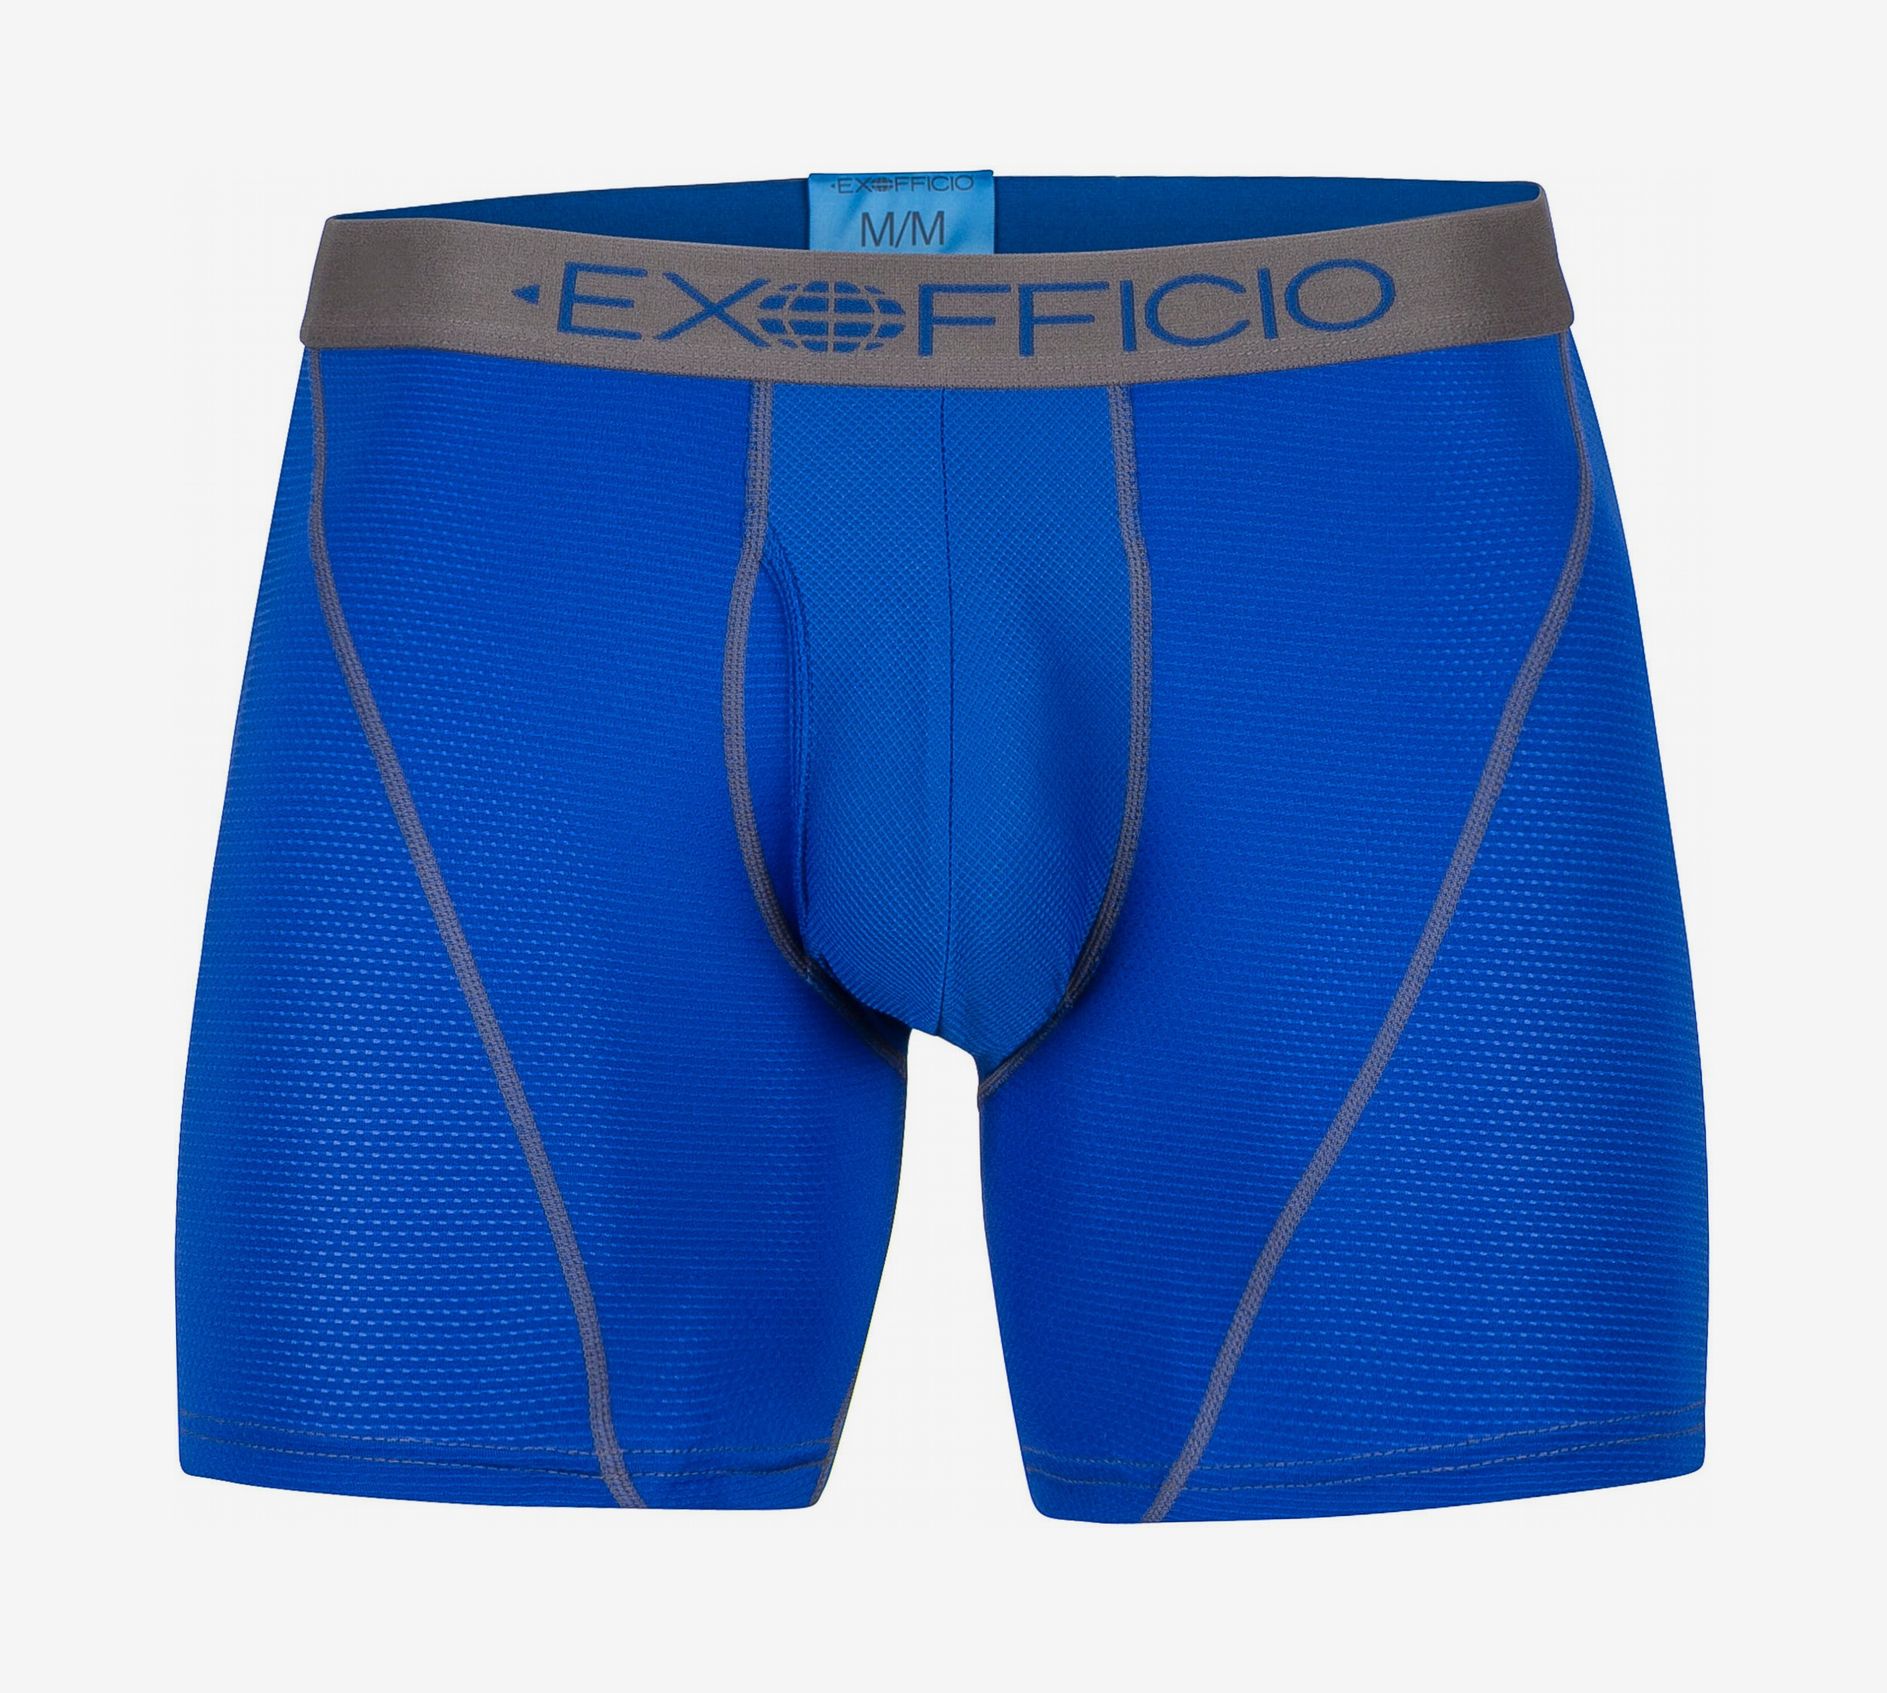 FASO on X: Grab the best deals on our men's briefs this week